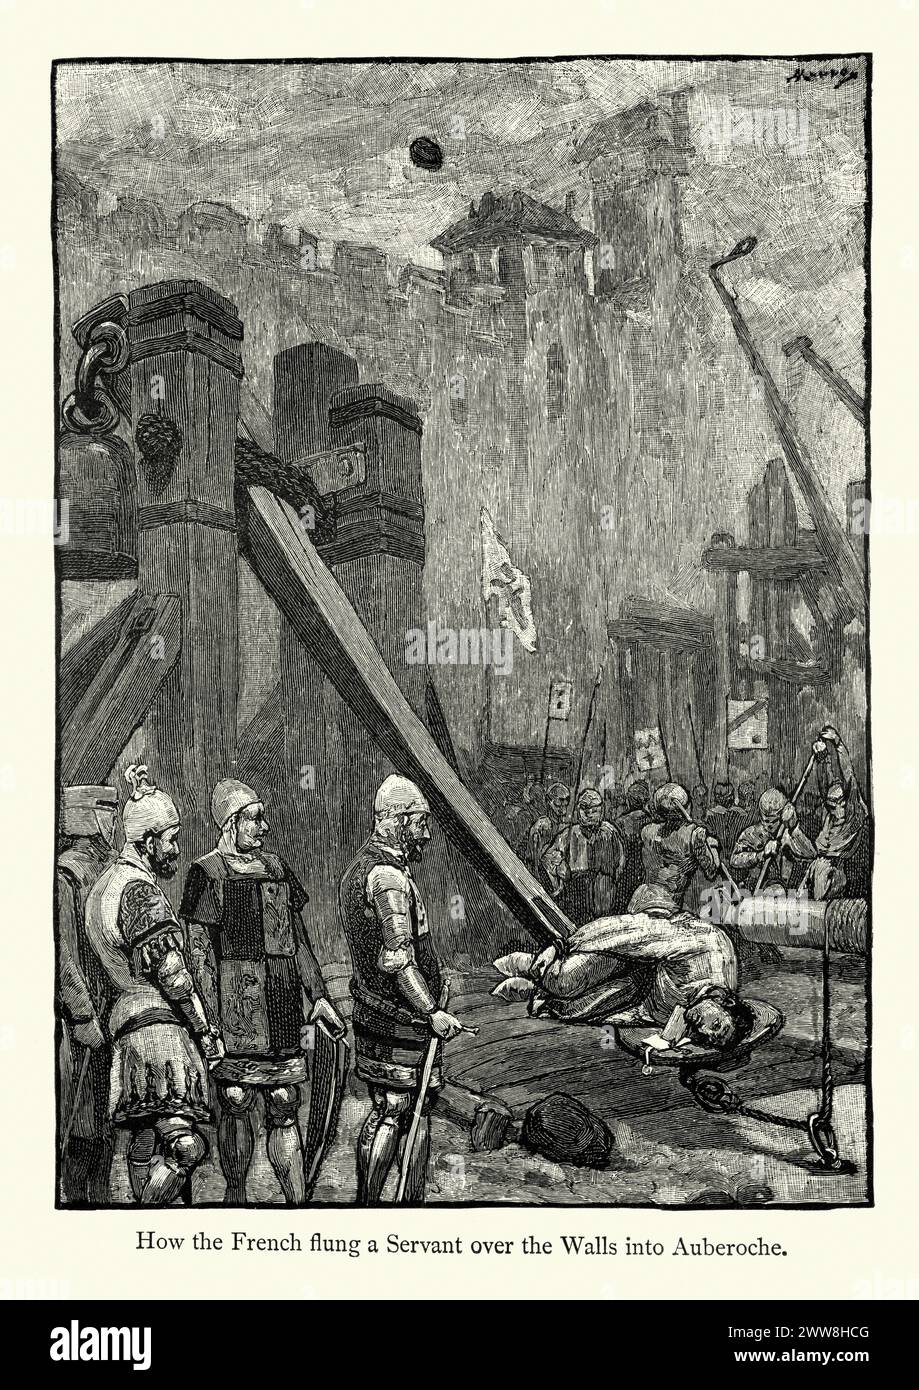 Vintage engraving of a scene from the Hundred Years War, french soldiers throw a man over the walls of Auberoche, Aquitaine, France, using a medieval catapult. Stock Photo